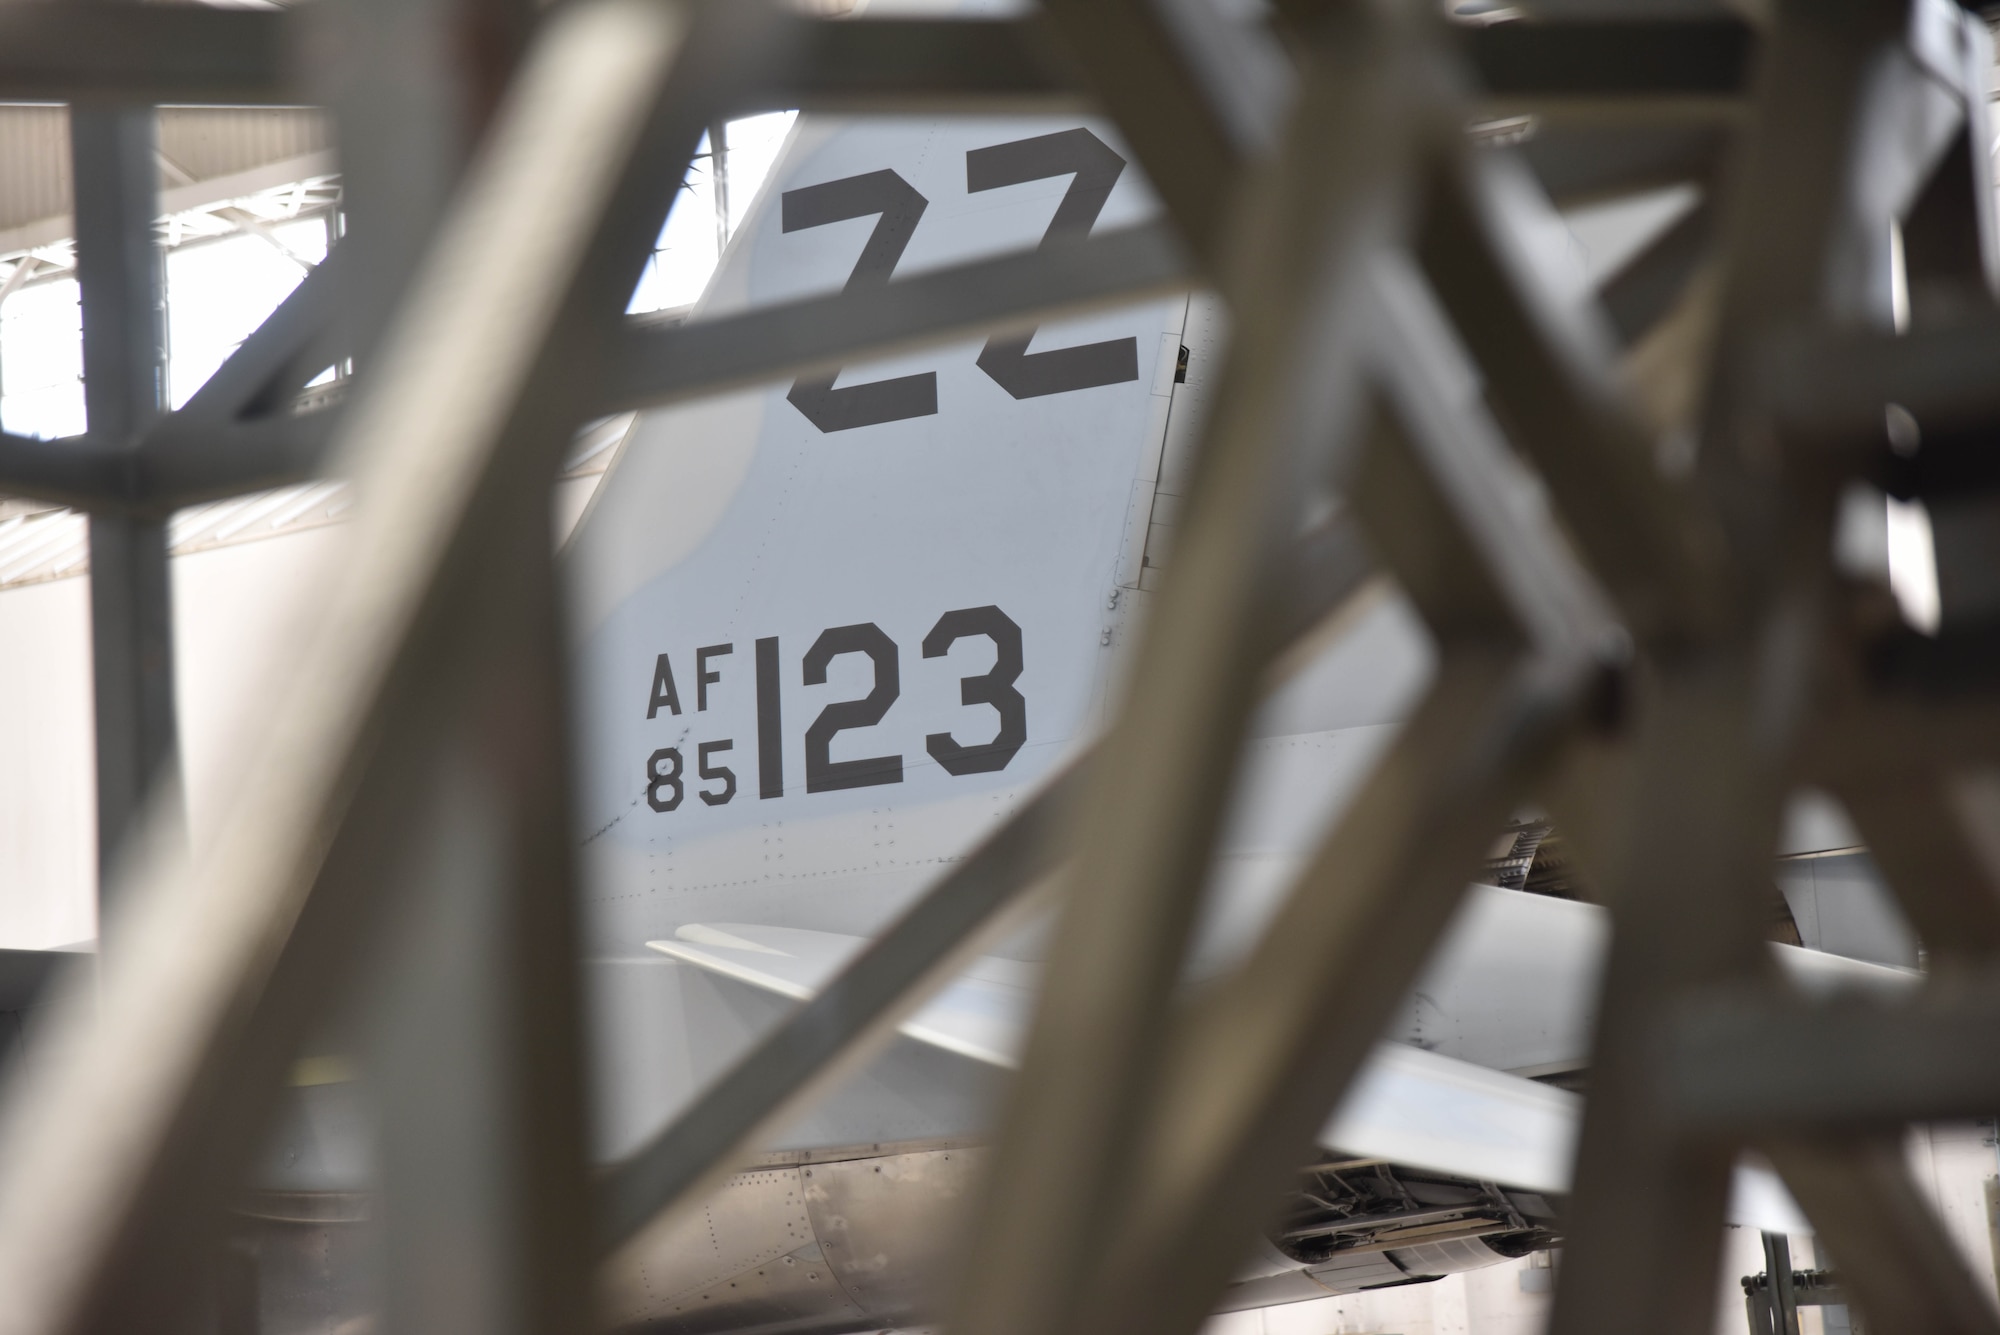 The tail number of a fighter jet is surrounded by metallic bars